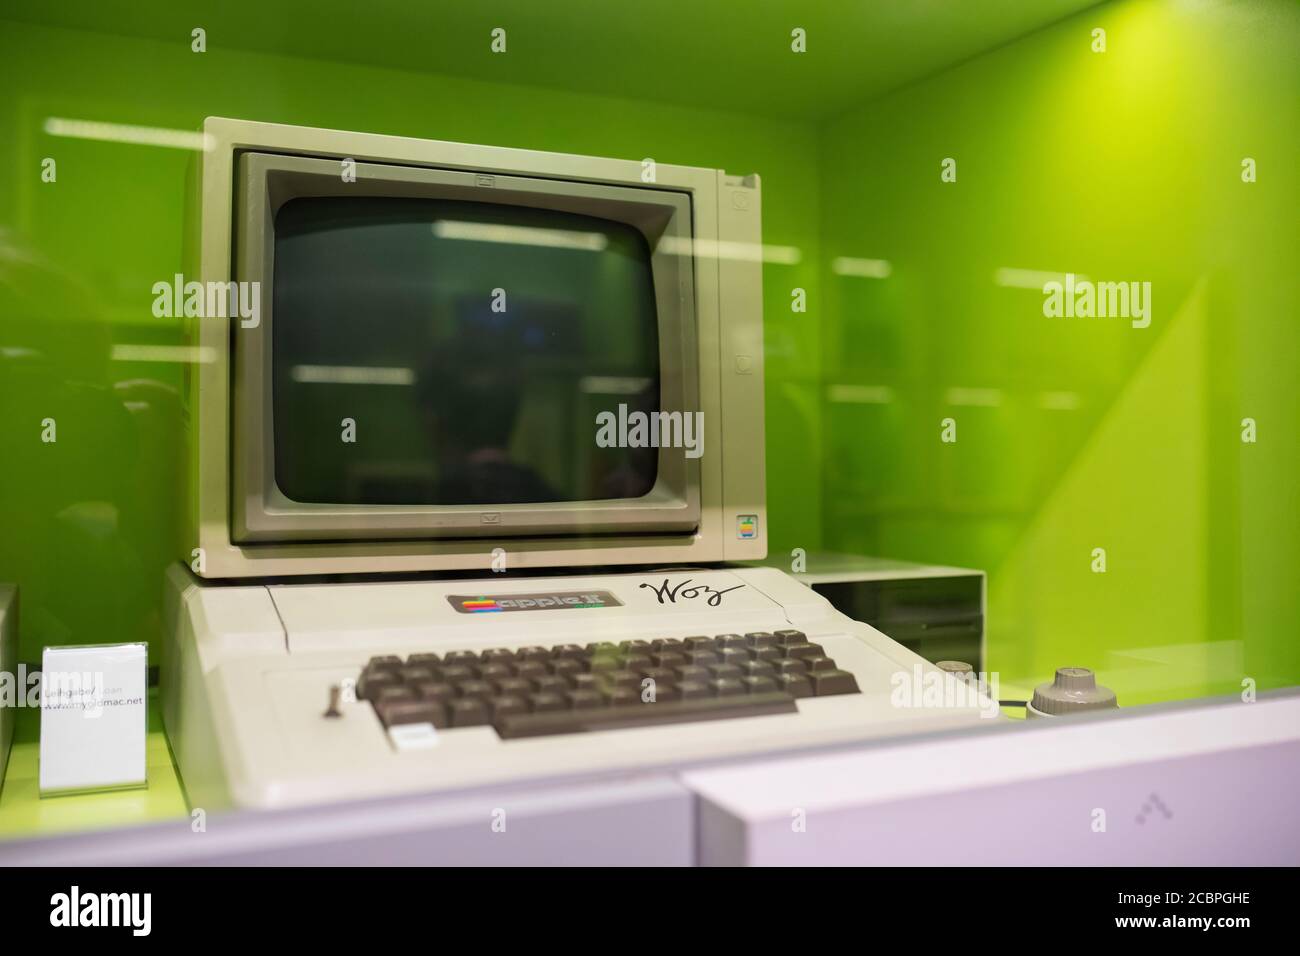 An original Apple II computer signed by Steve Wozniak at the Computerspiele Museum (video game museum) in Berlin, Germany. Stock Photo